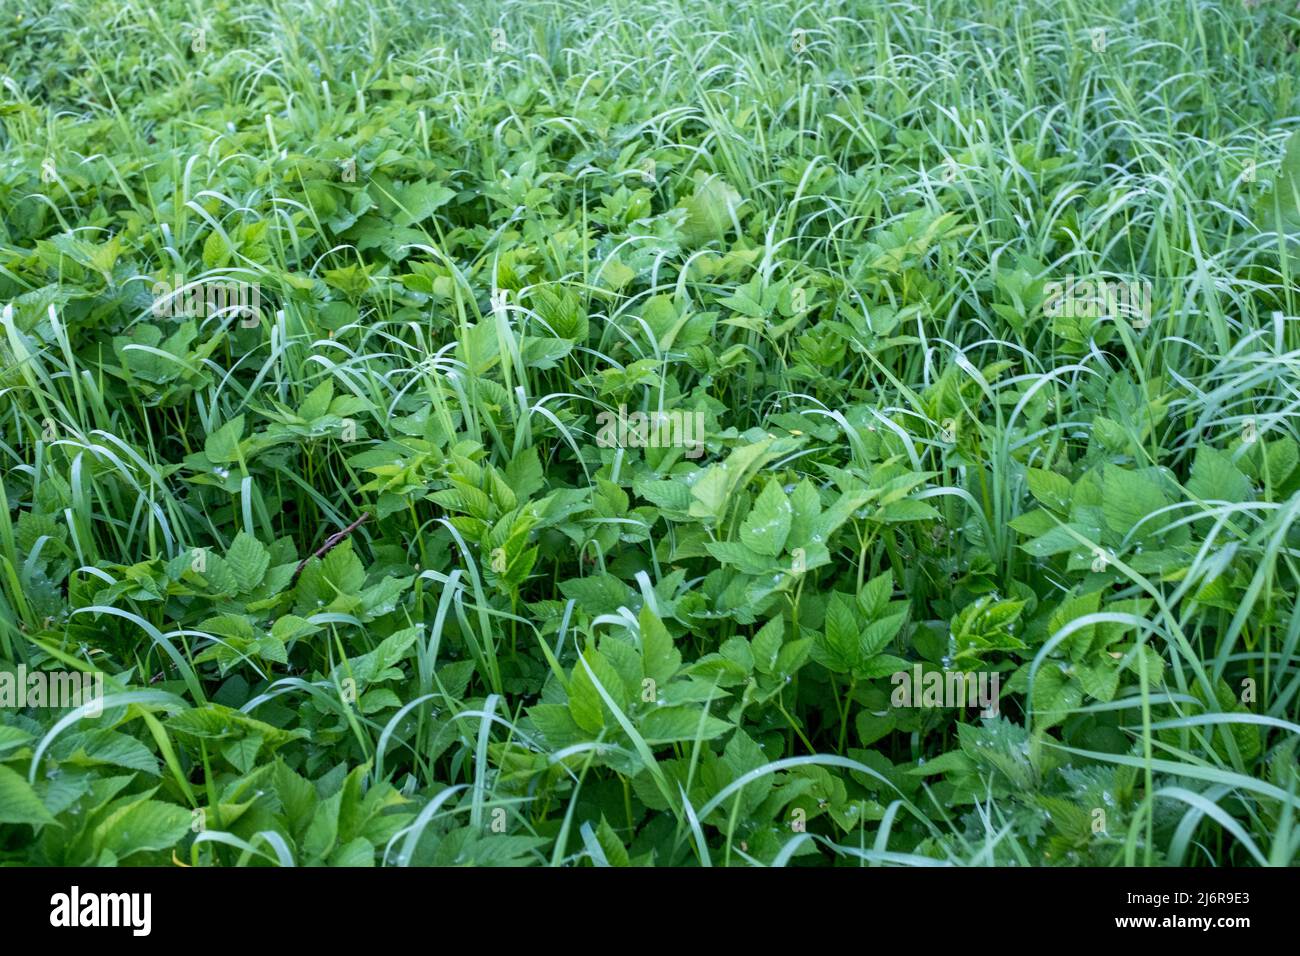 Spring meadow background, selective focus. Green goutweed and grass field for design or project. Meadowland texture for publication, design, poster Stock Photo